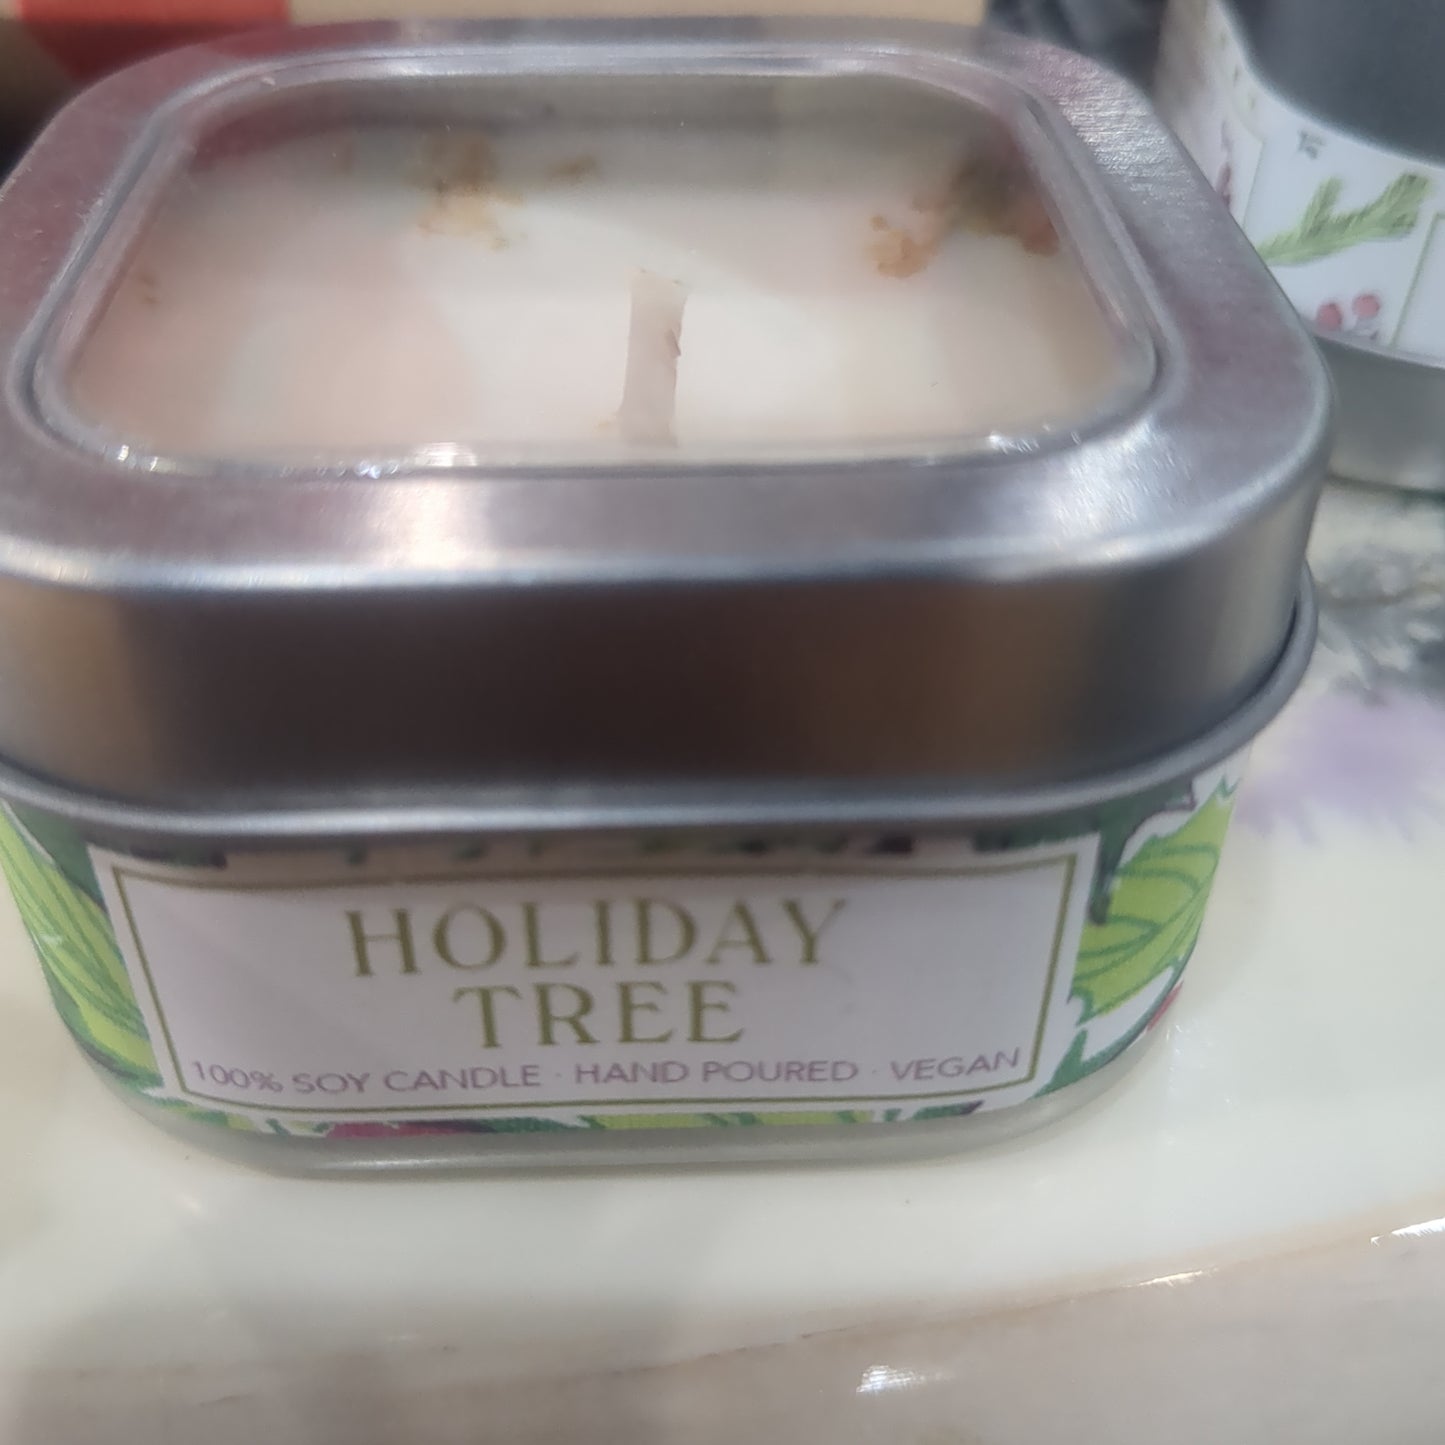 Scented Holiday Favorites Boxed Soy Candle Quartet - Christmas